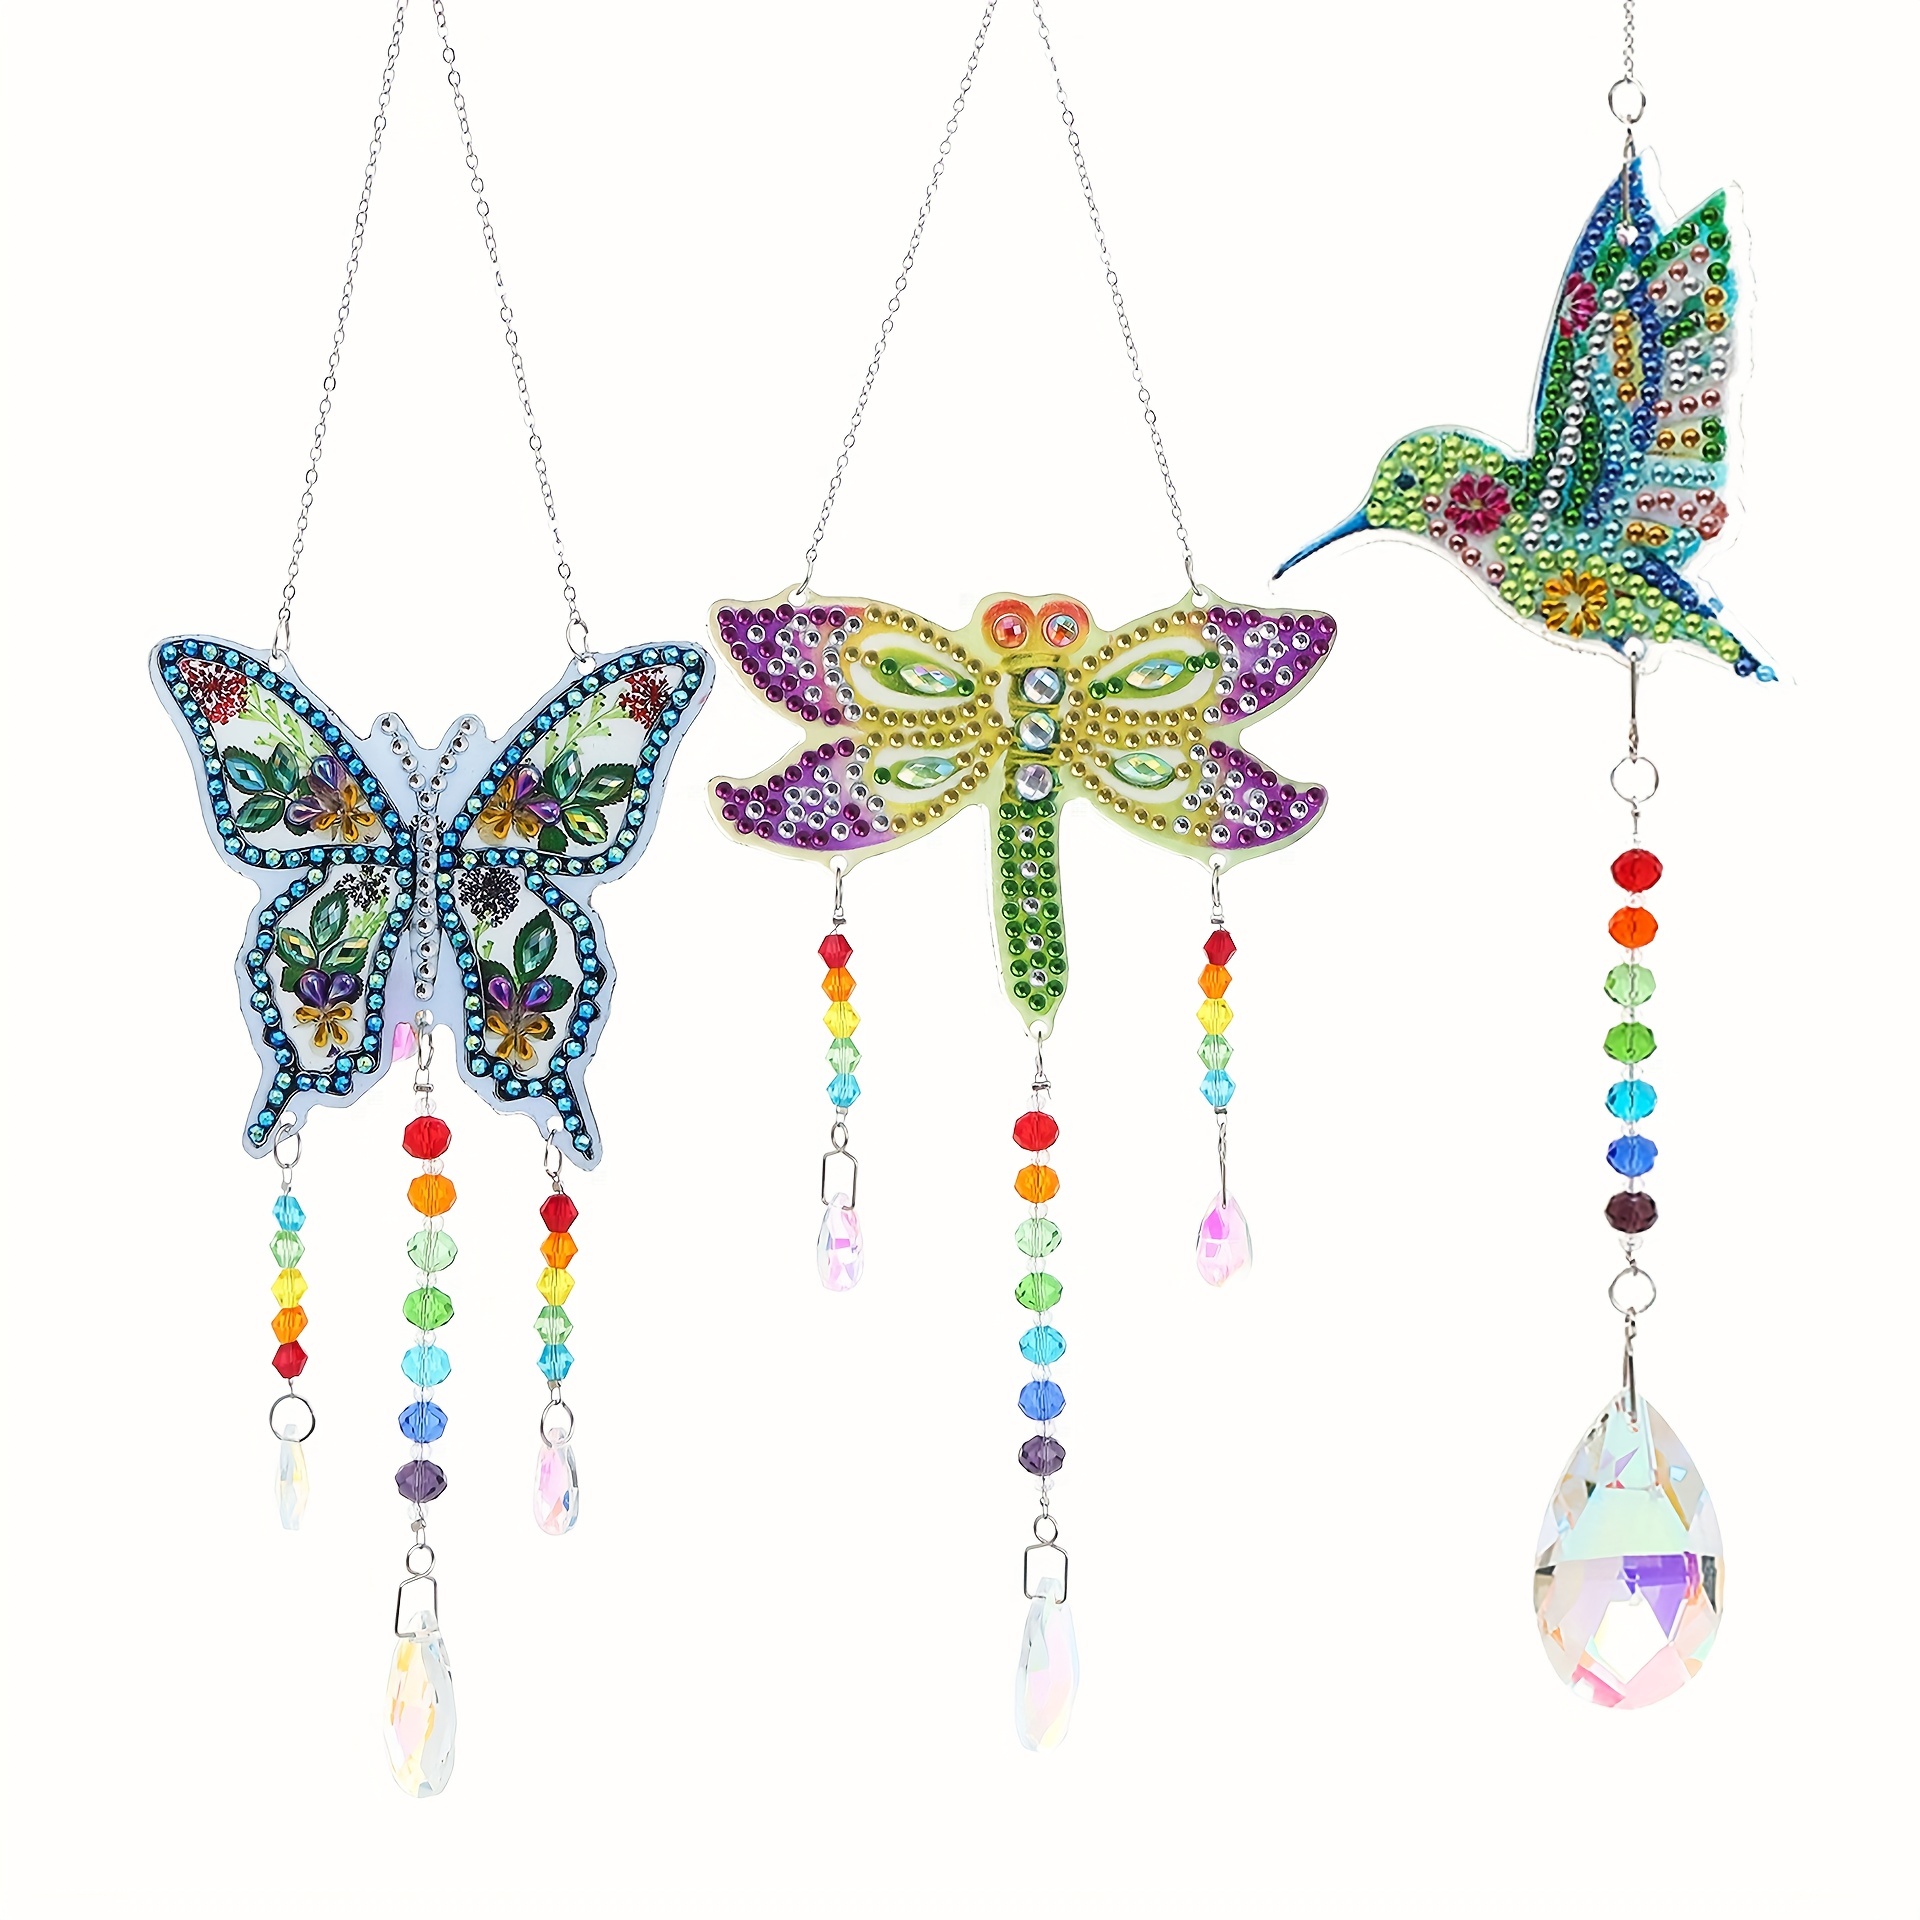  5 Pieces Diamond Painting Suncatcher Kits for Adults, Wind  Chime Kits for Kids Diamond Art Special Shapes Gem Paint by Number for  Garden Home Decor, Gift(Cat Hummingbird Peacock Butterfly) 